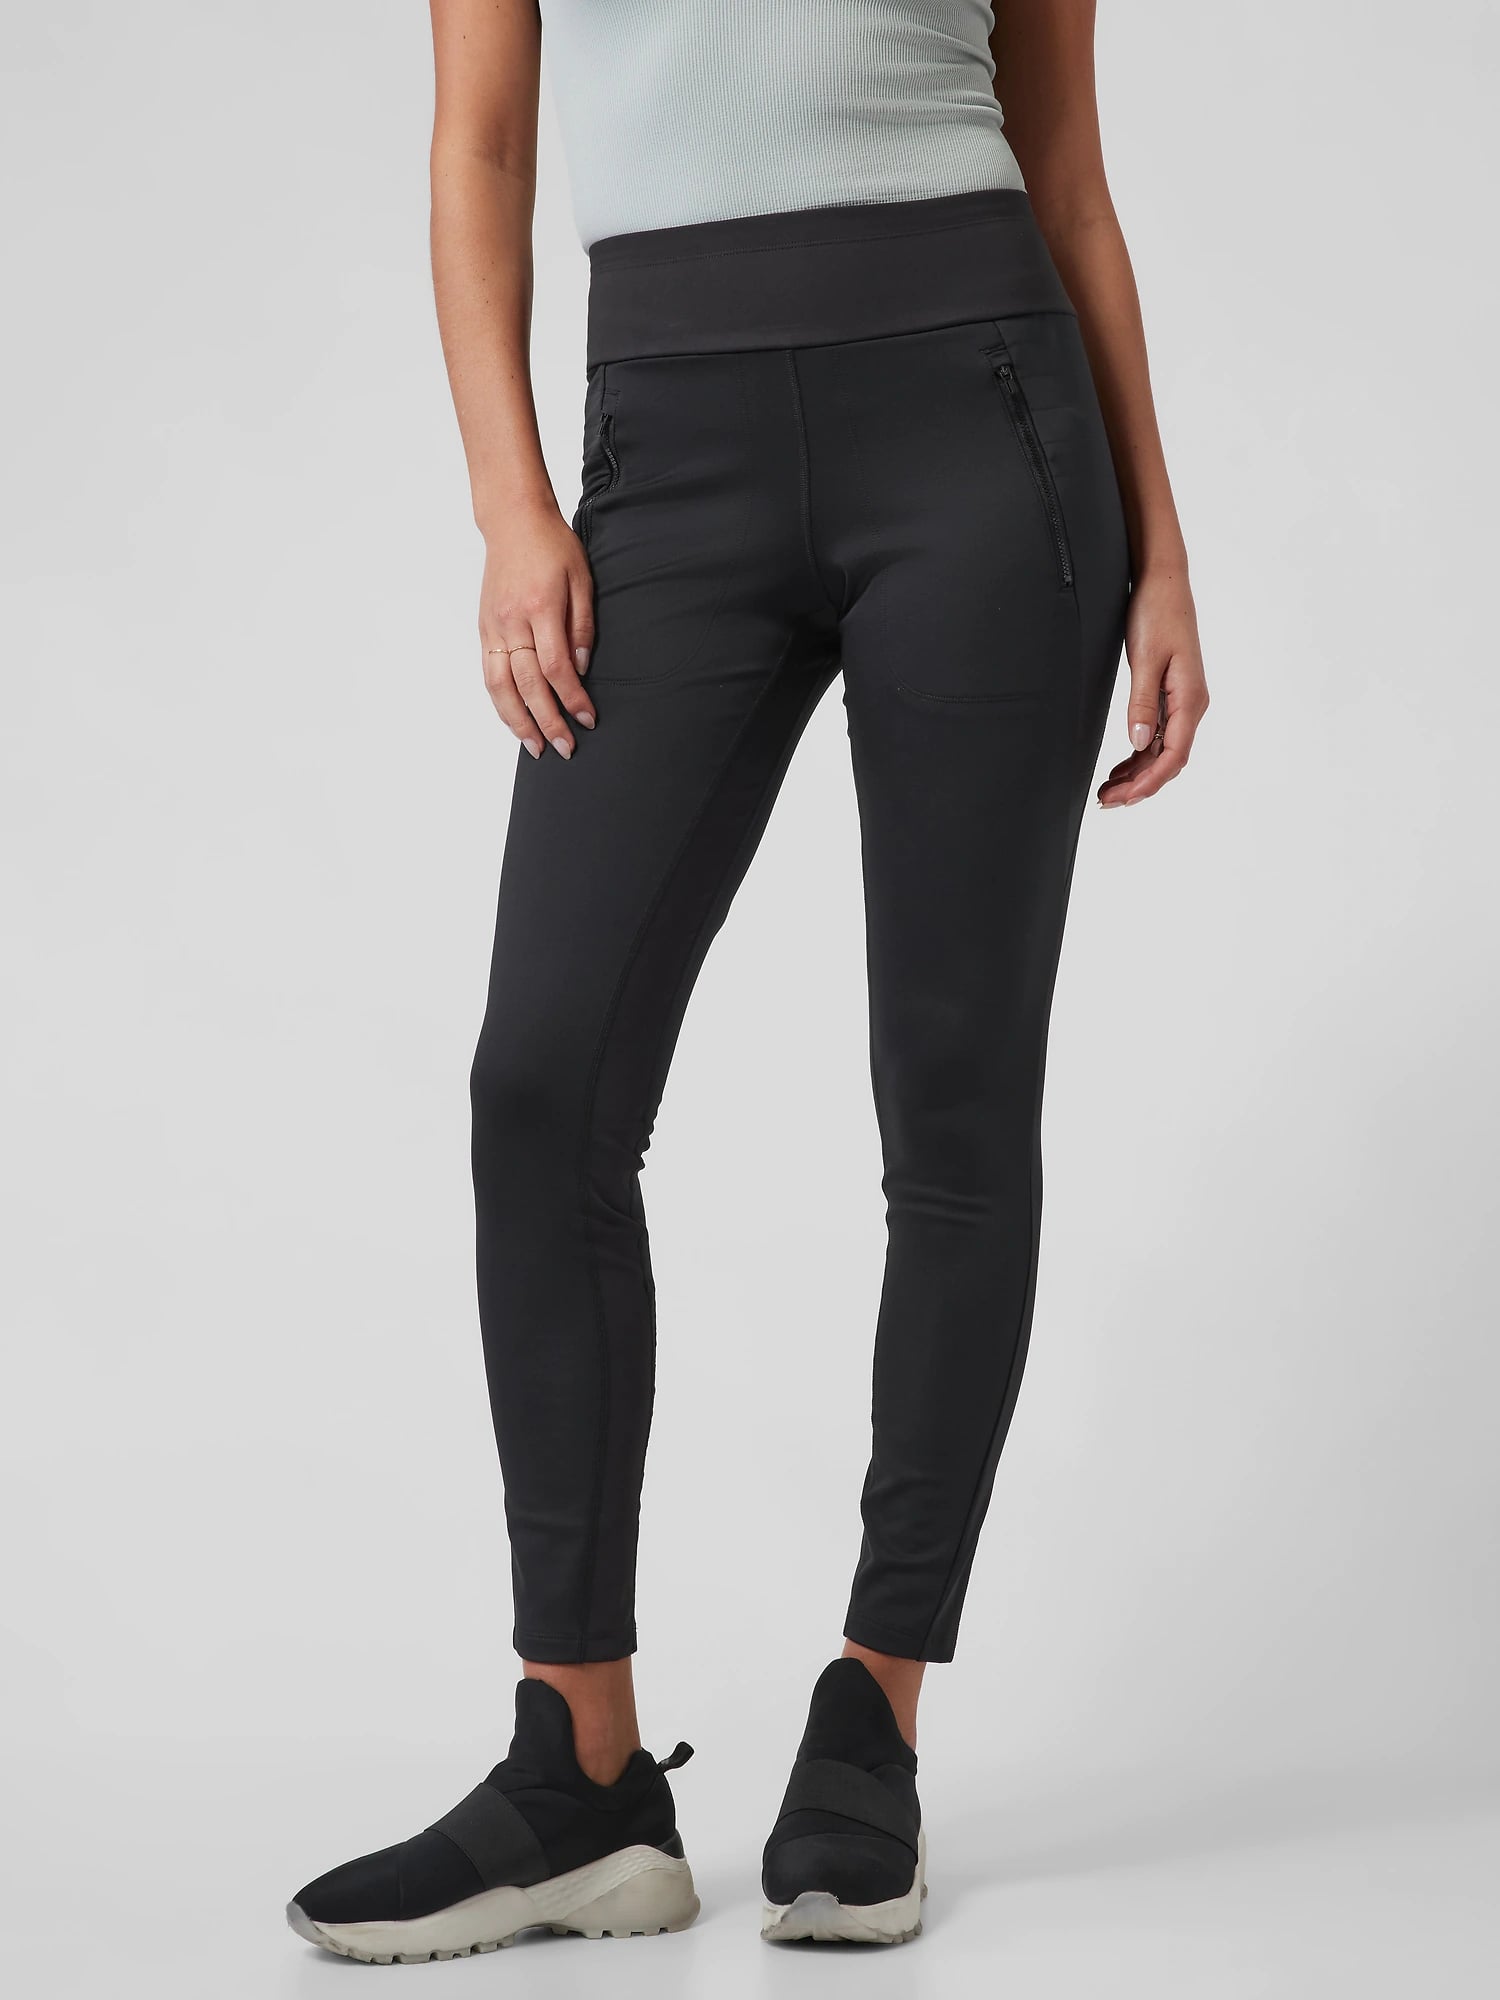 Athleta Flurry Ombre Tights Leggings Ribbed Black Heather and